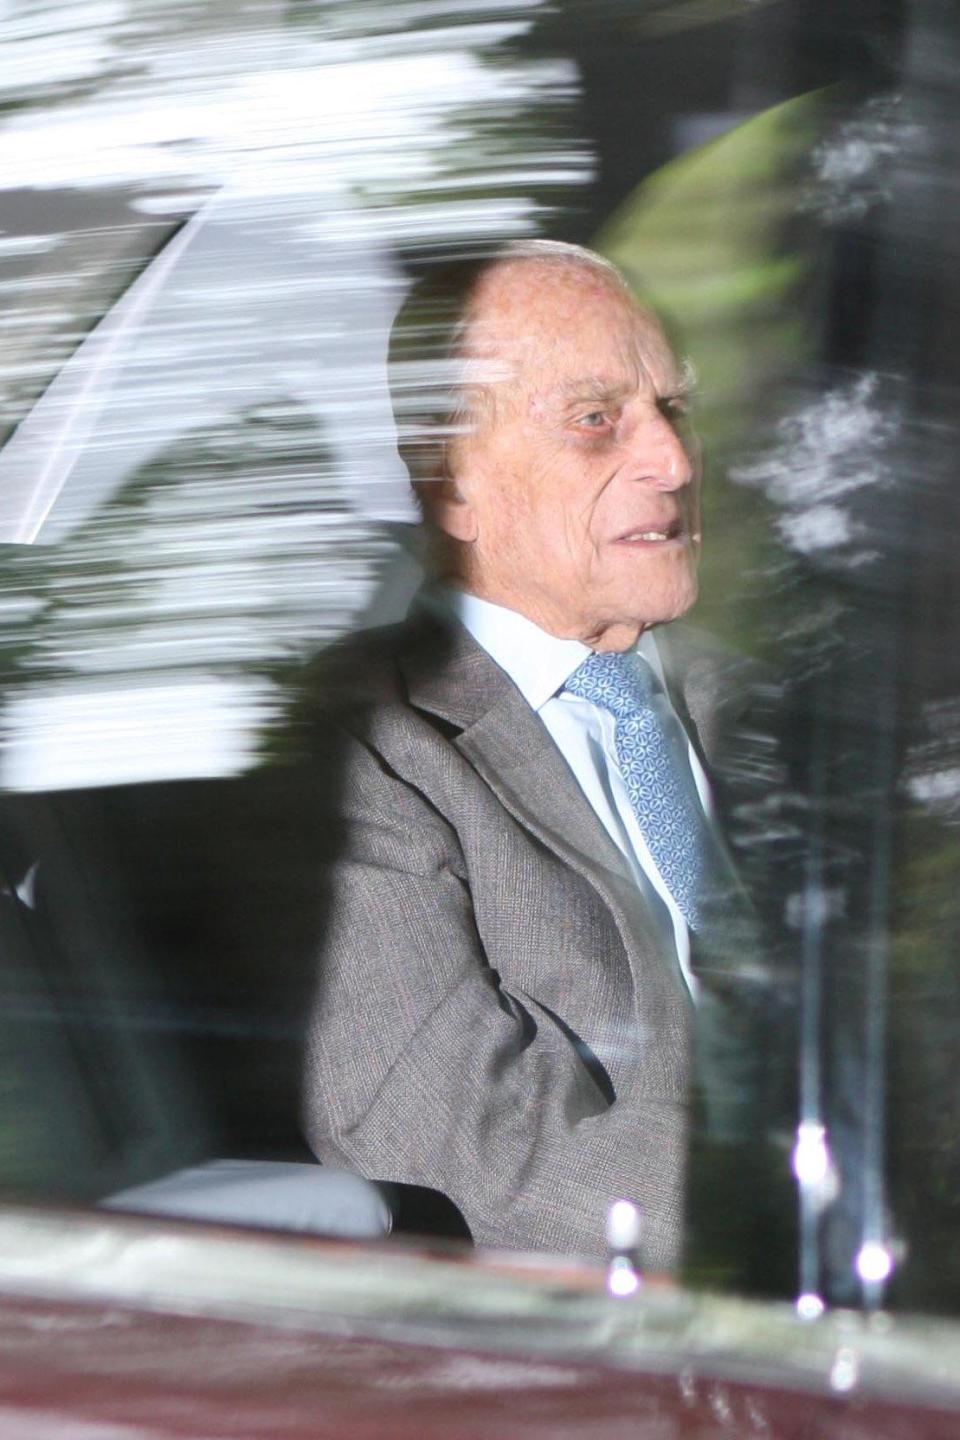 Prince Philip heading to church this morning in Balmoral (Rex Features)